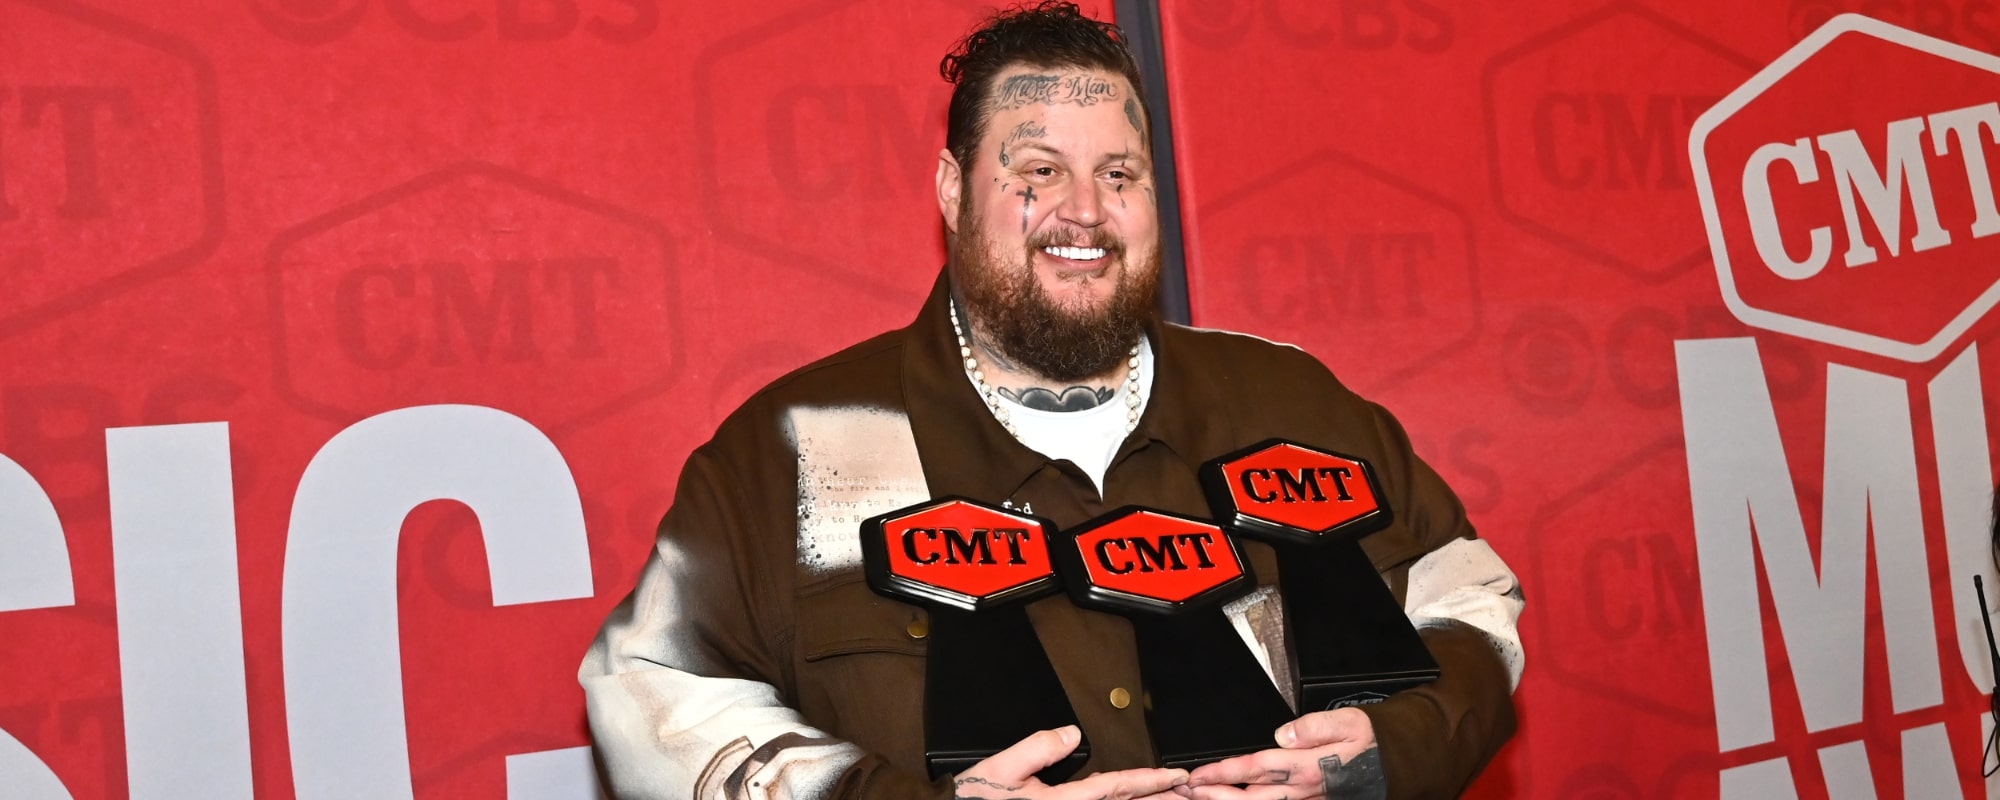 Jelly Roll Breaks Record, Joins Blakes Shelton & Kenny Chesney in CMT Awards History